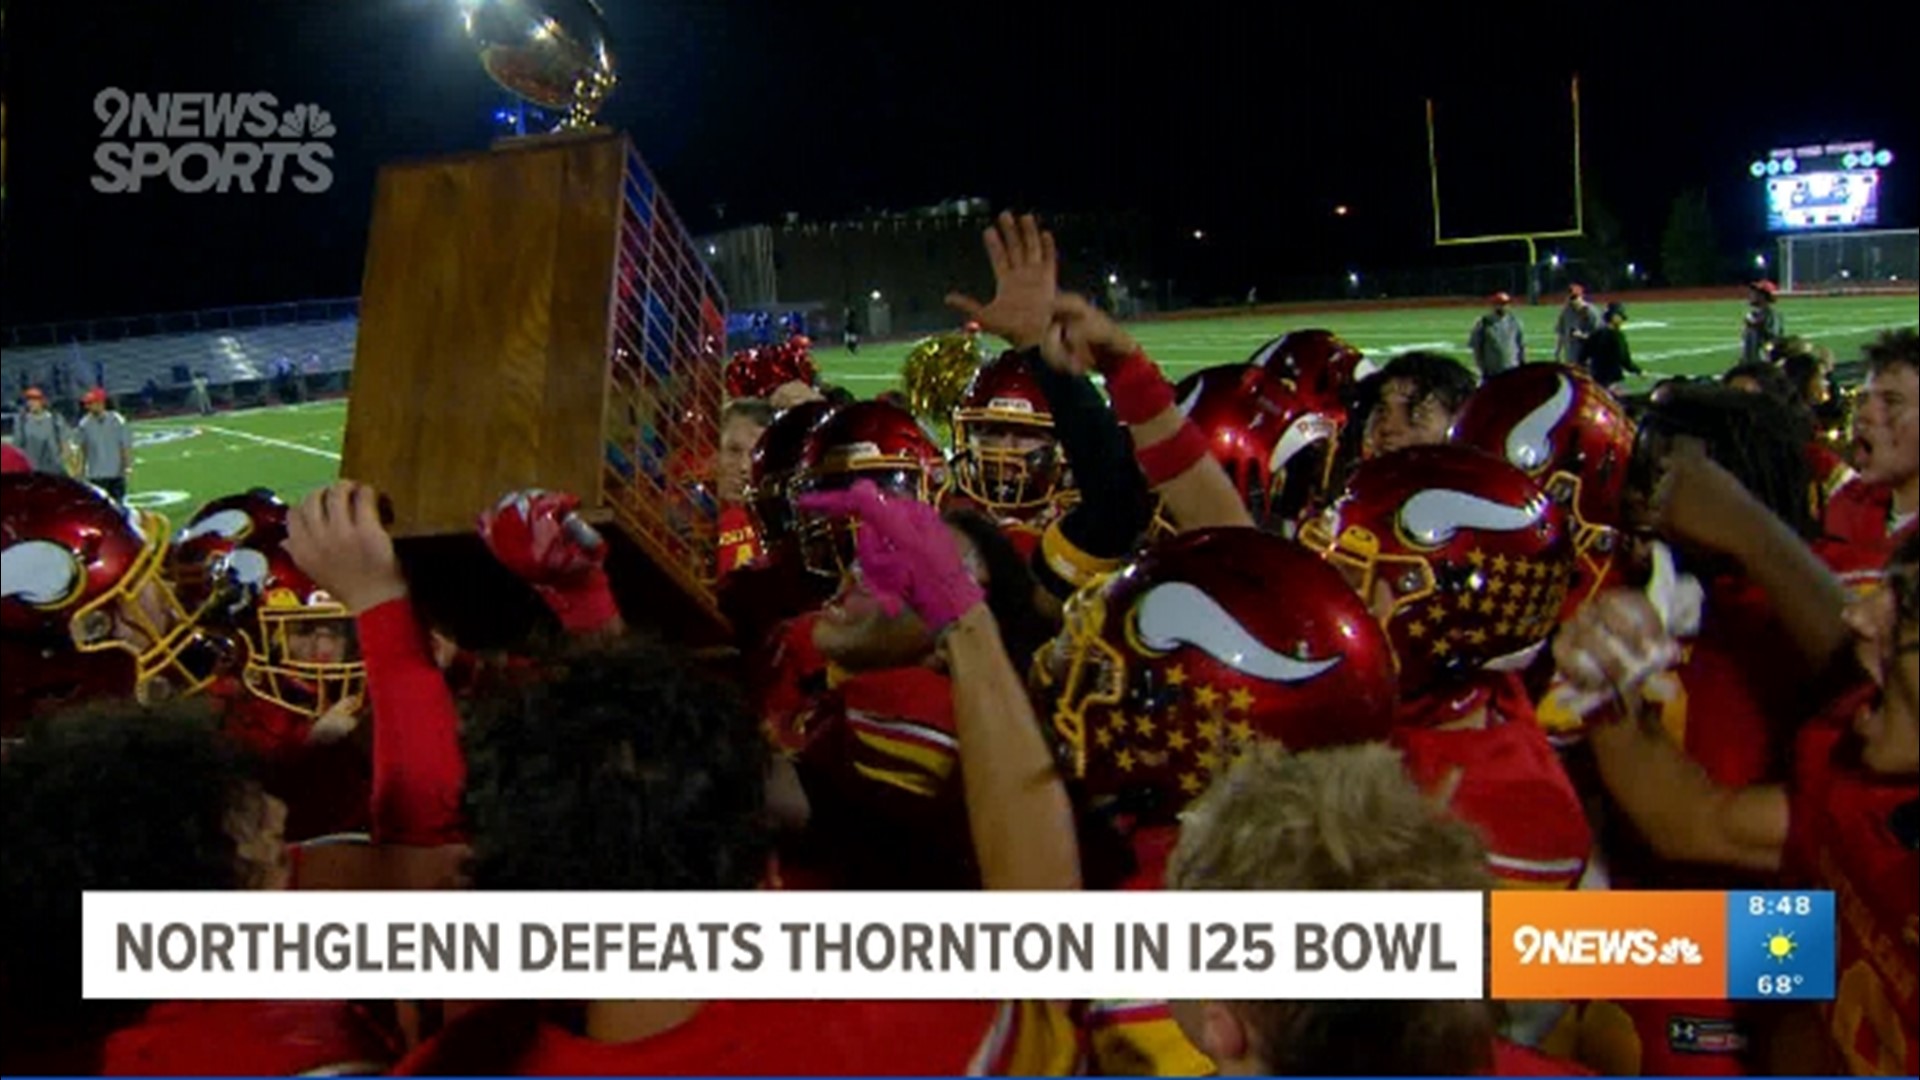 The Norsemen defeated the Trojans 49-35 in the I-25 Bowl rivalry game.